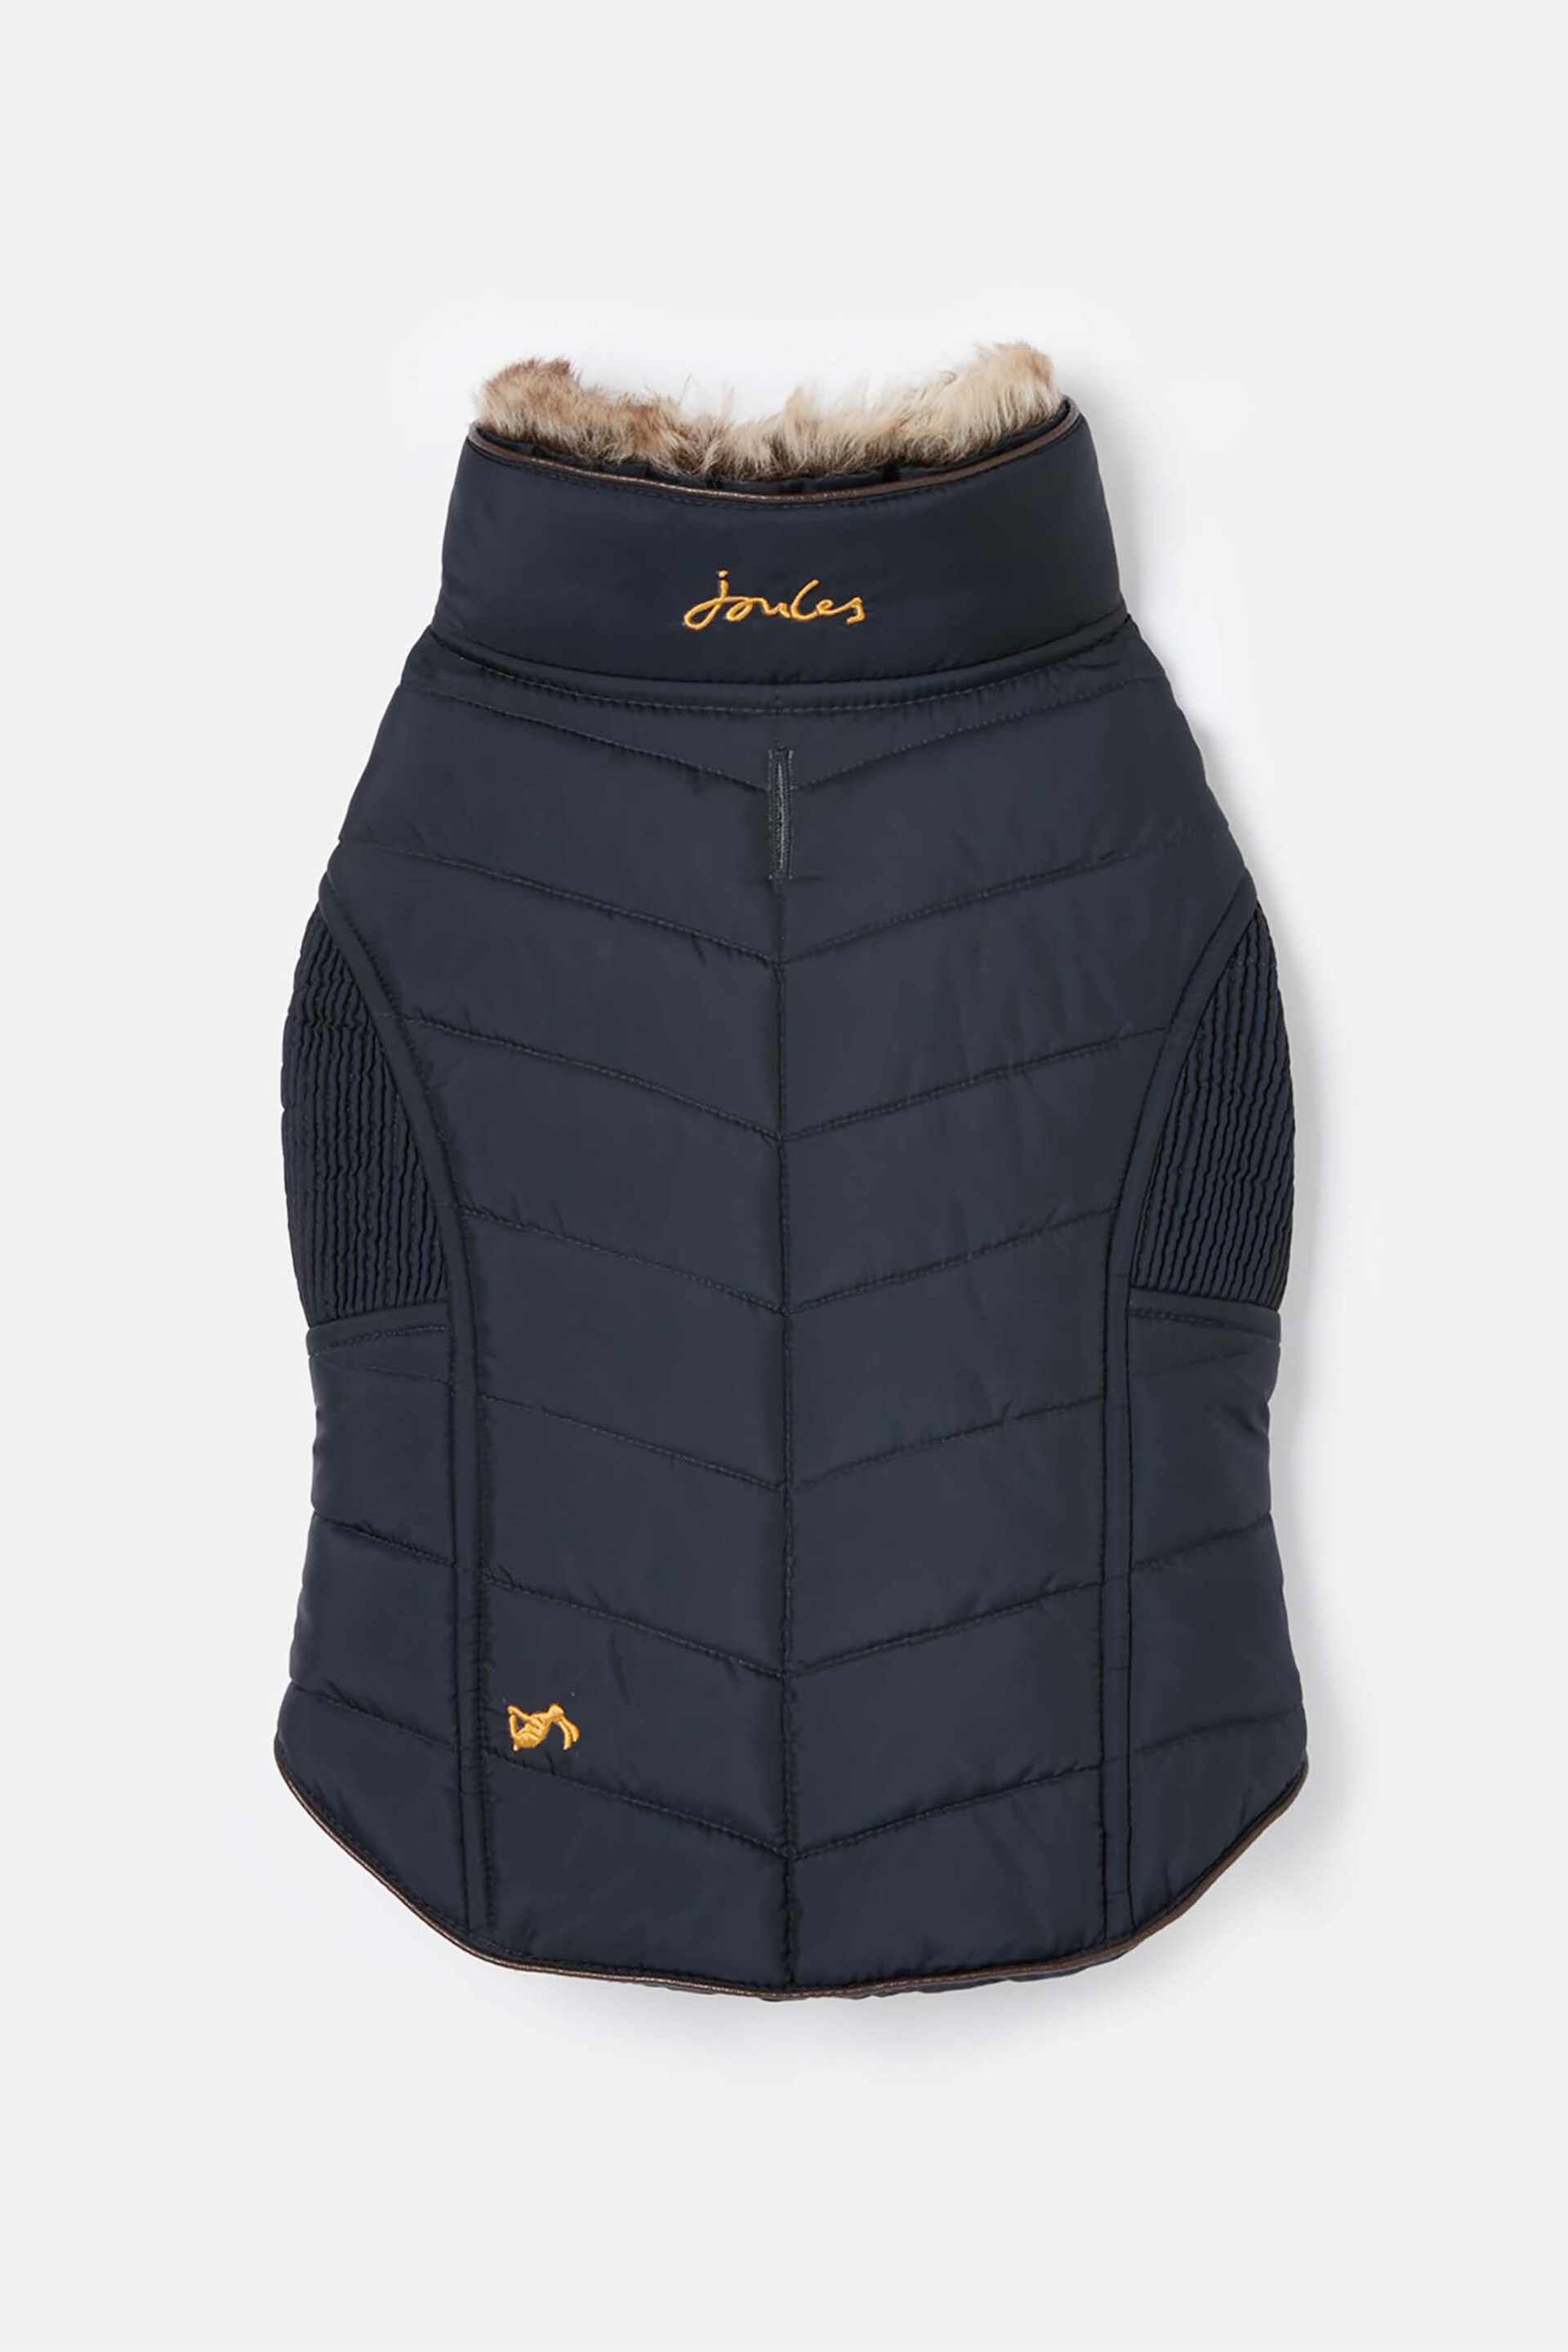 Joules Blue Chevron Padded Quilted Dog Coat - Image 1 of 4